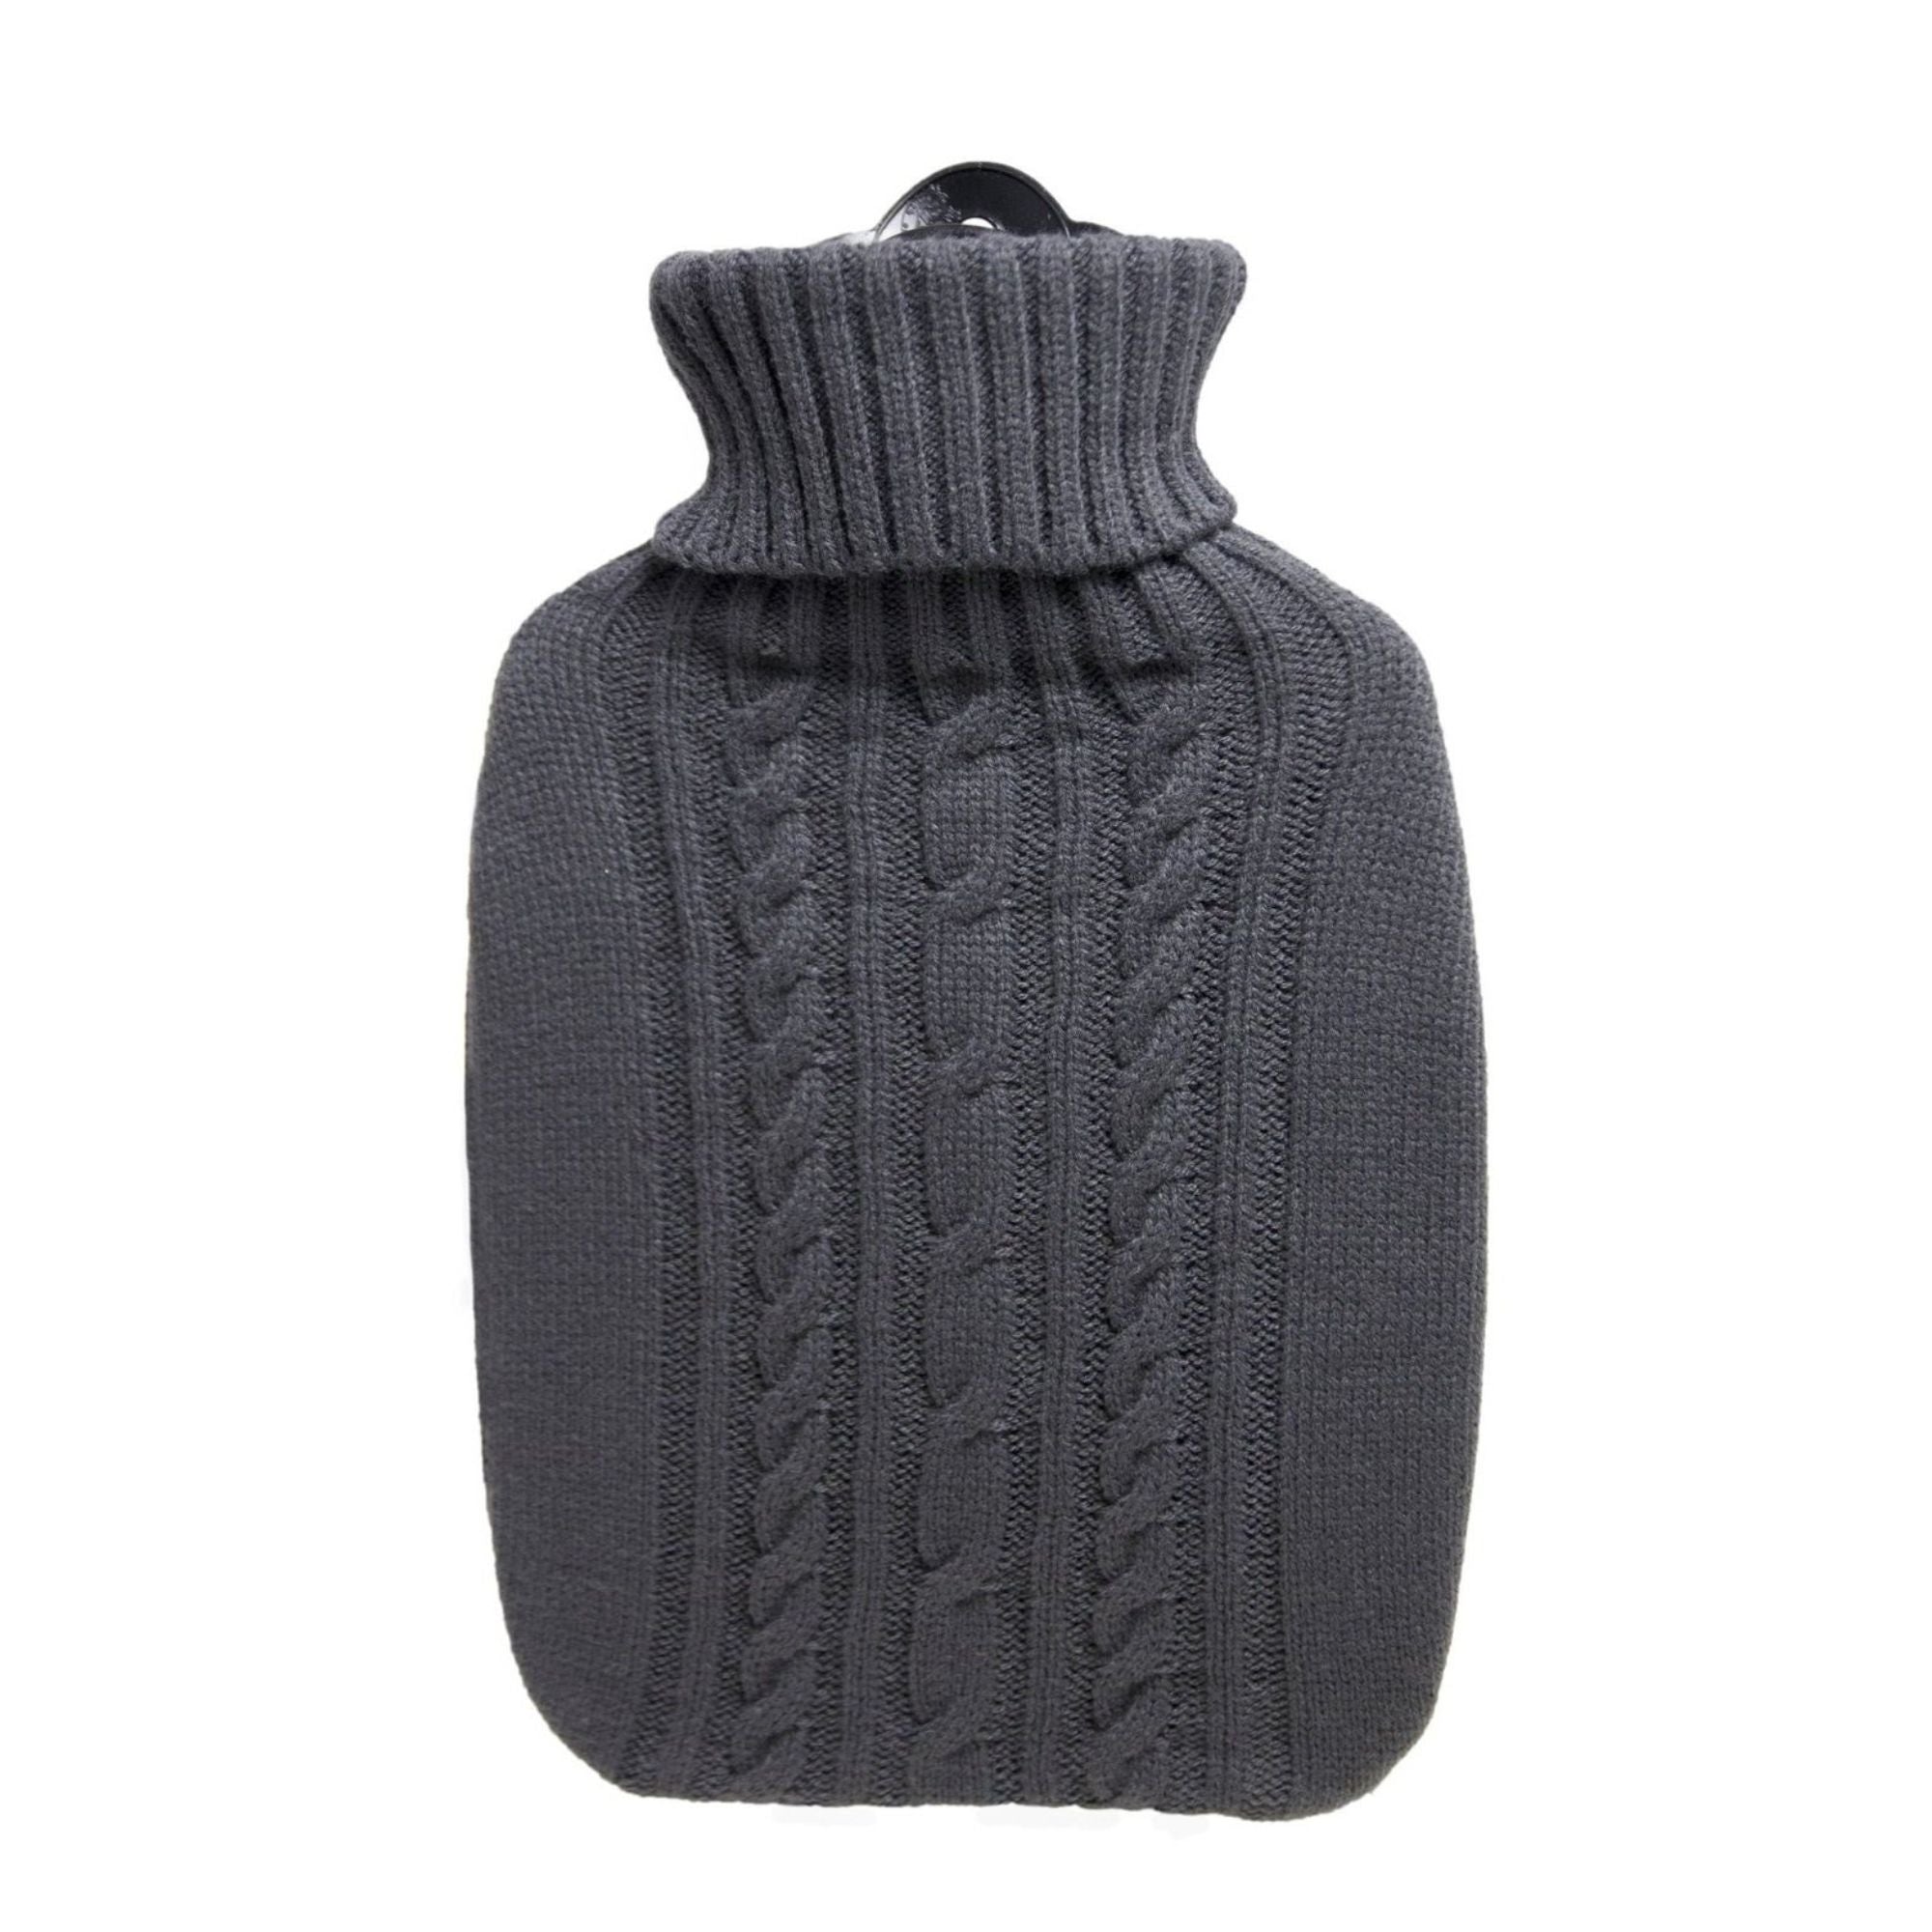 1.8 Litre Hot Water Bottle with Knitted Dark Grey Cover (rubberless)